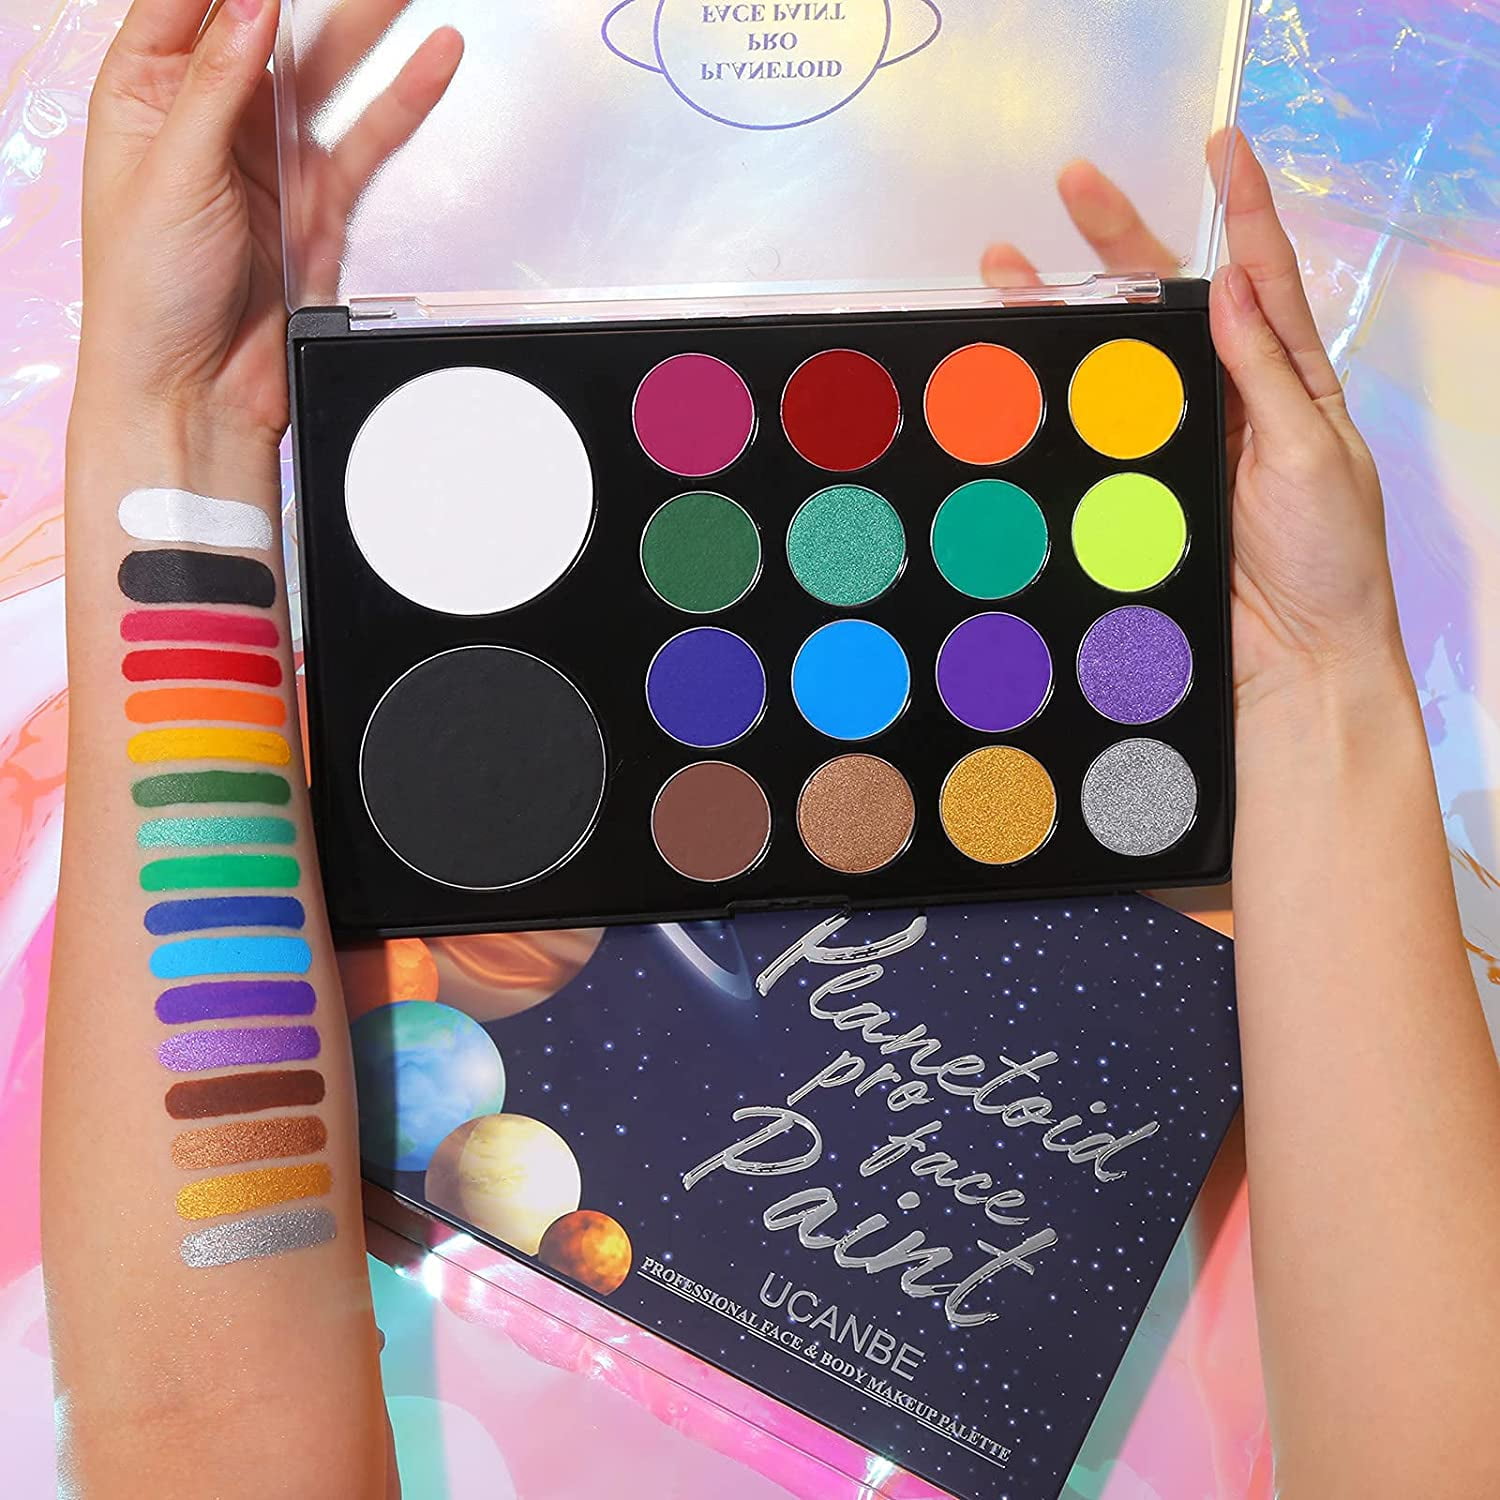 PLANETOID PRO FACE & BODY PAINTING PALETTE – UCANBE